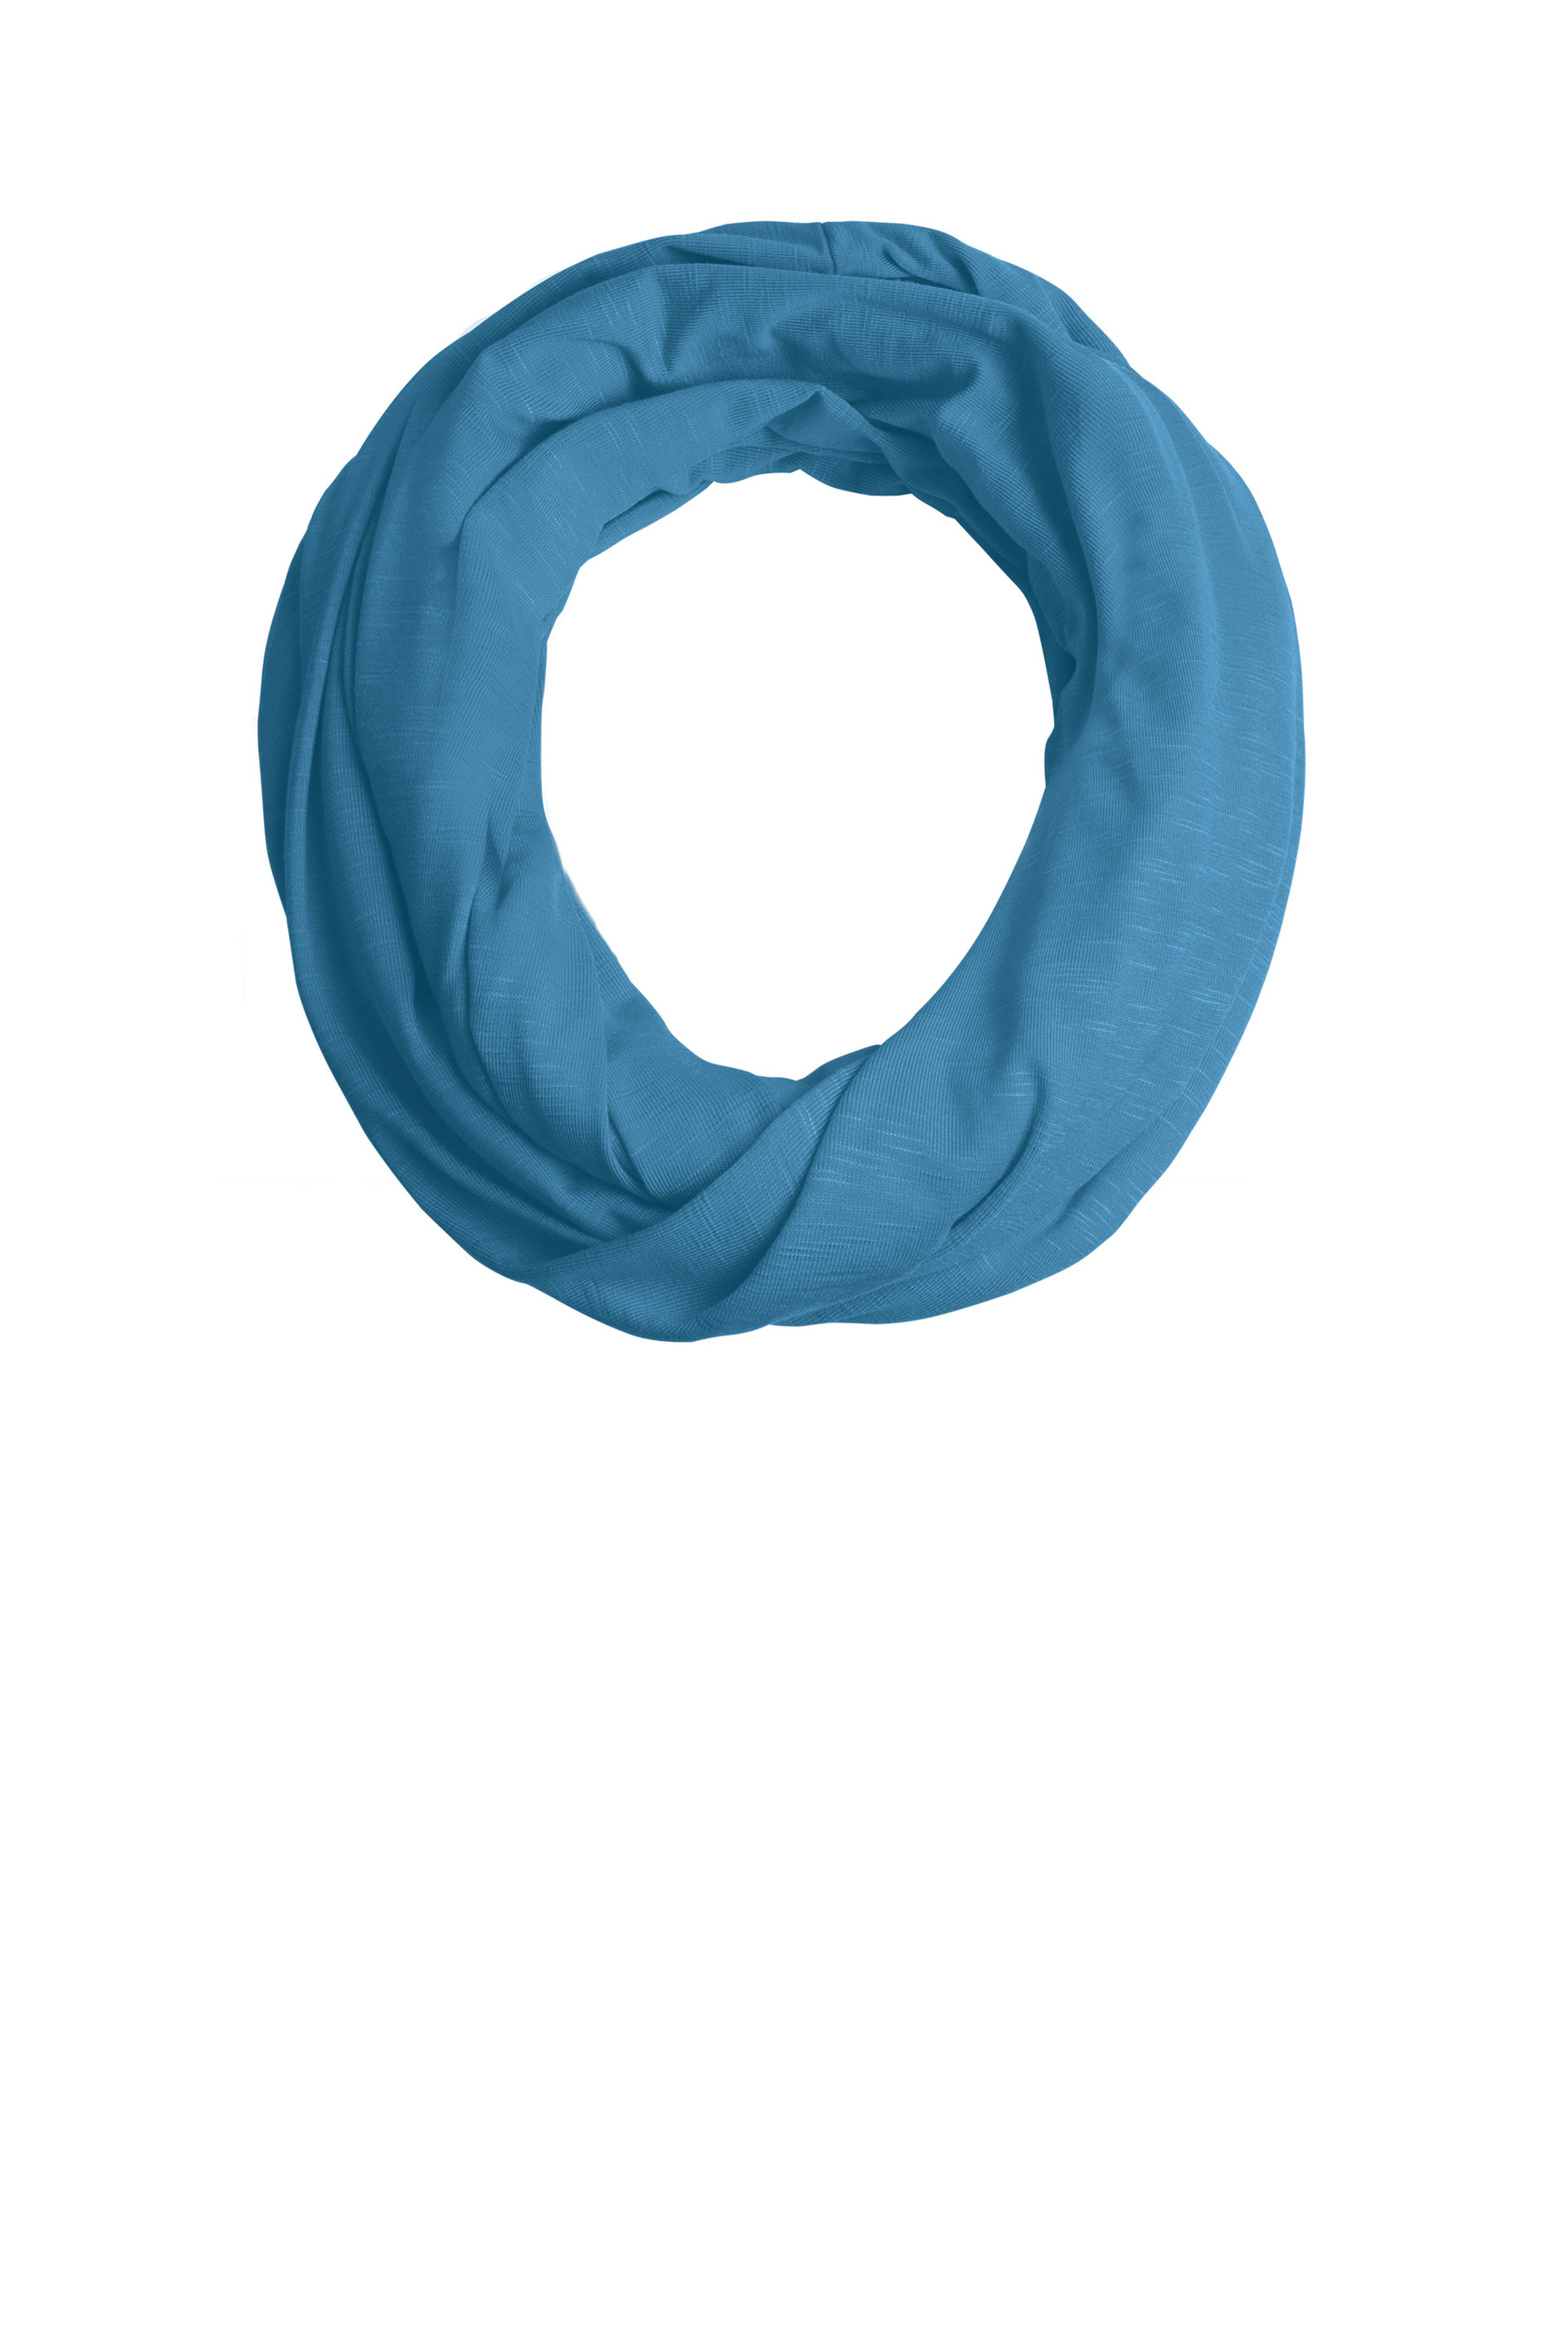 43408_florence_infinity_scarf_oxford_blue.jpg